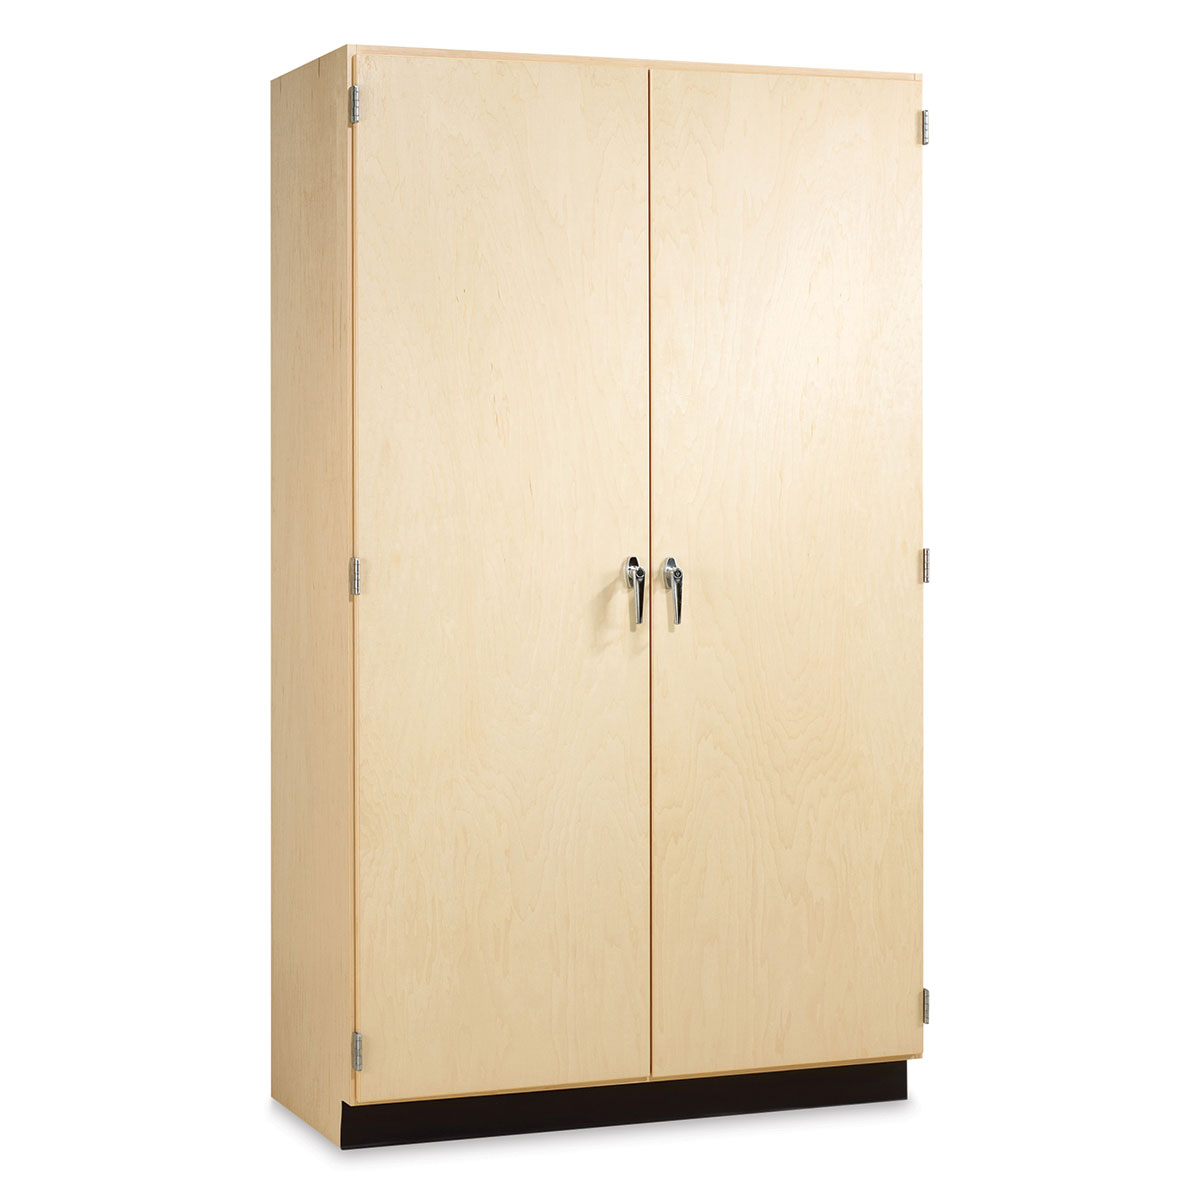 Diversified Spaces Drafting Supply Cabinet - 24' Wide, Cabinet only